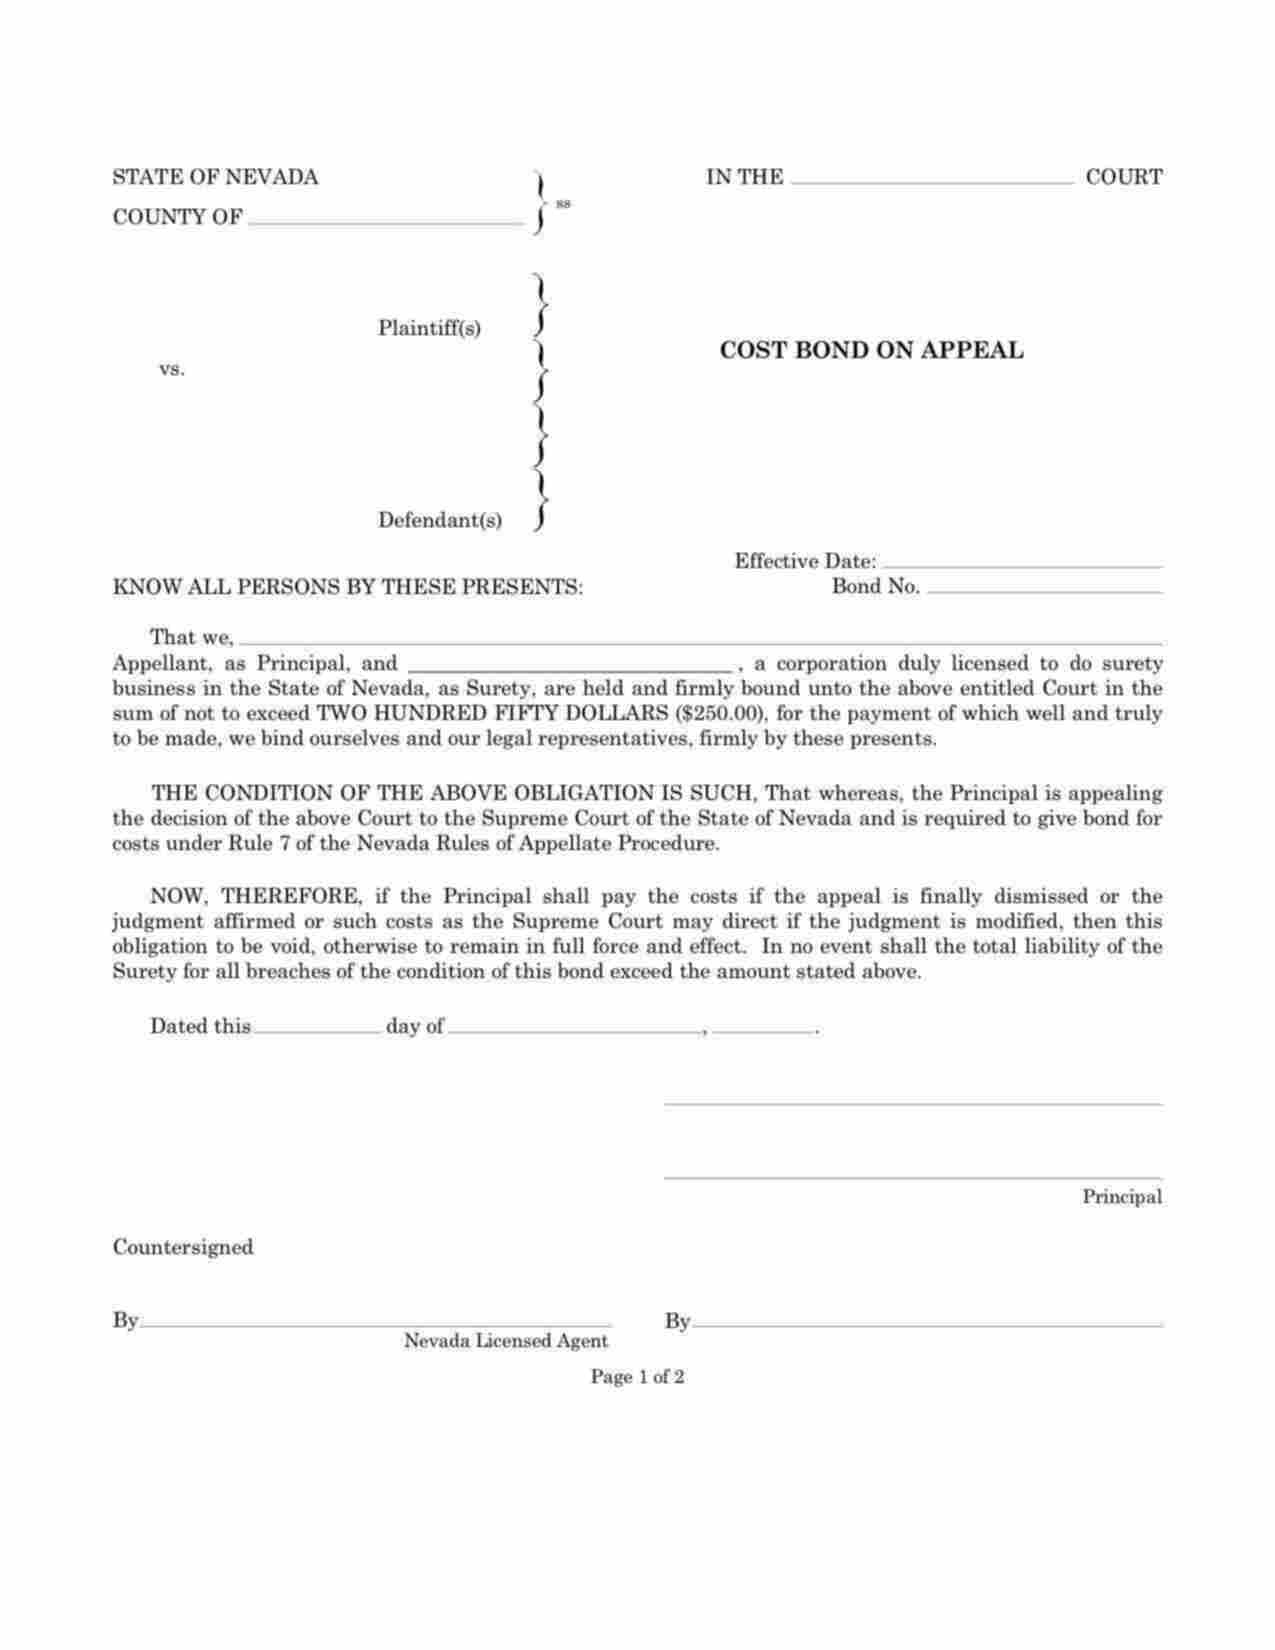 Nevada Cost on Appeal Bond Form